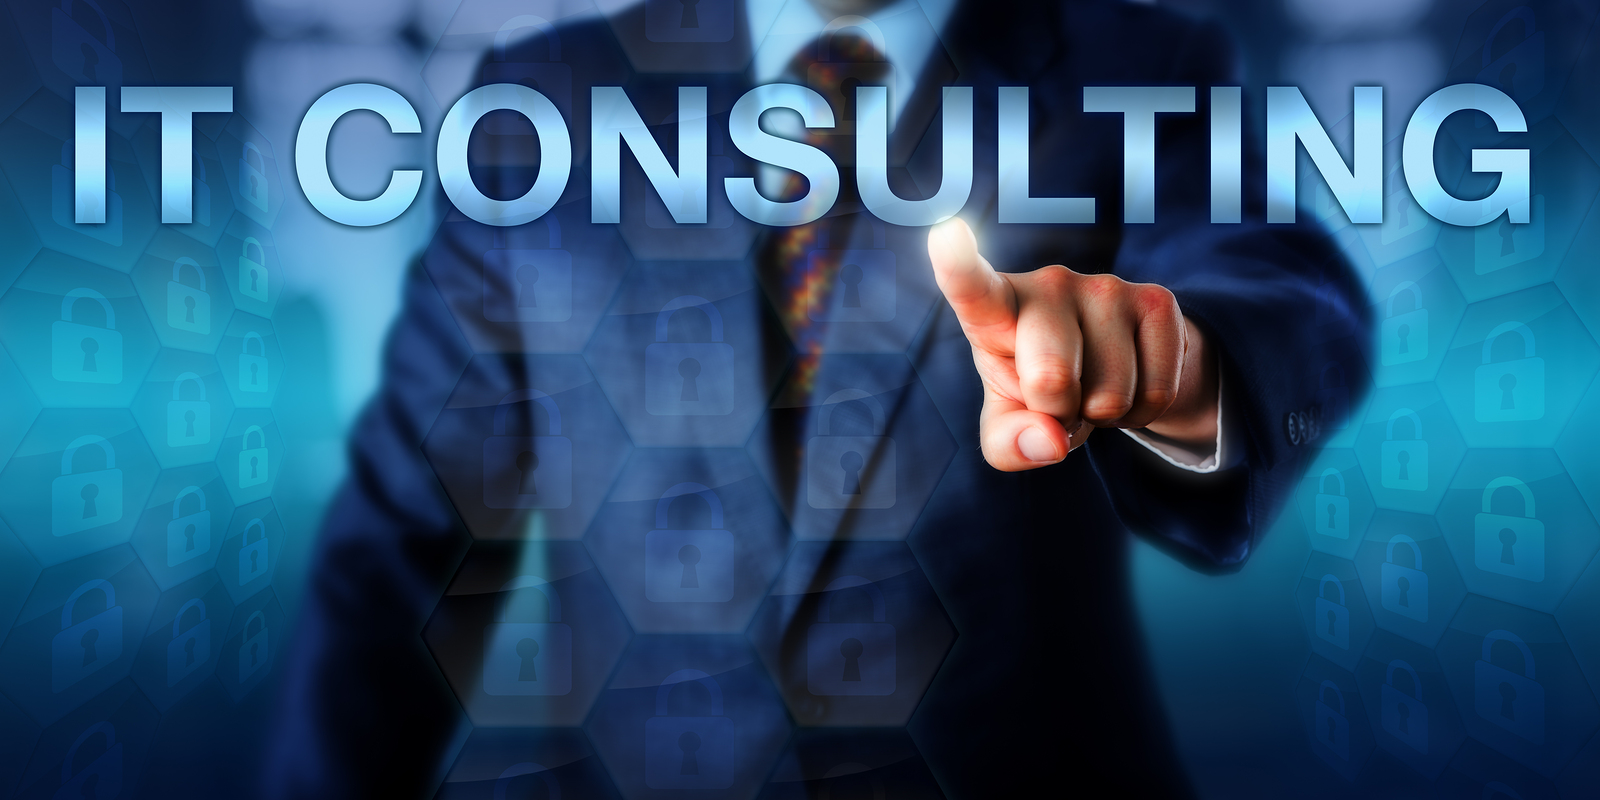 5 Questions to Ask When Considering an IT Consultant